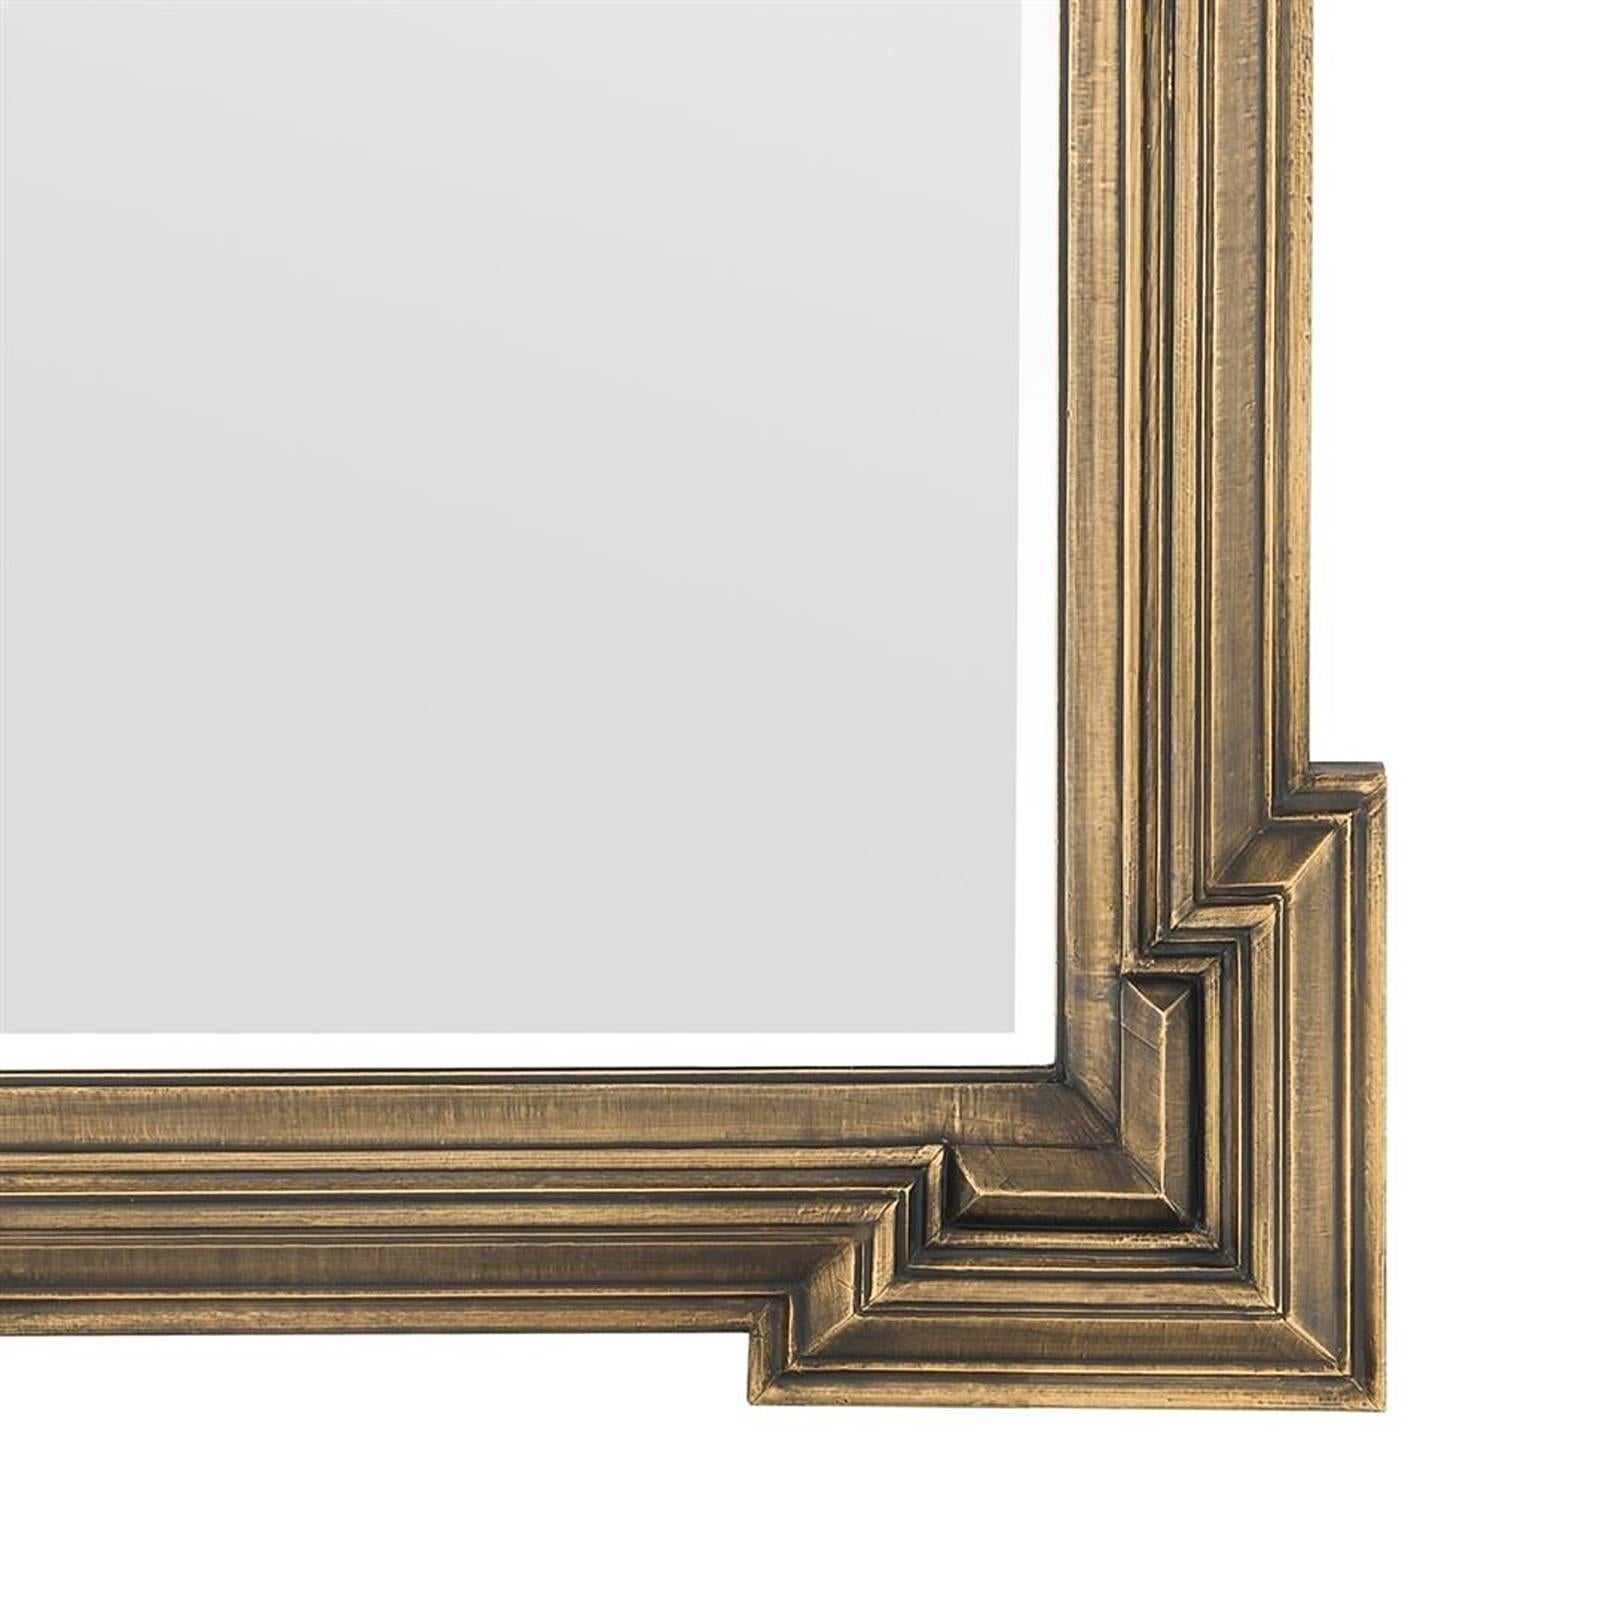 Indian Scuadro Mirror with Antique Brass Finish Rectangular Frame For Sale